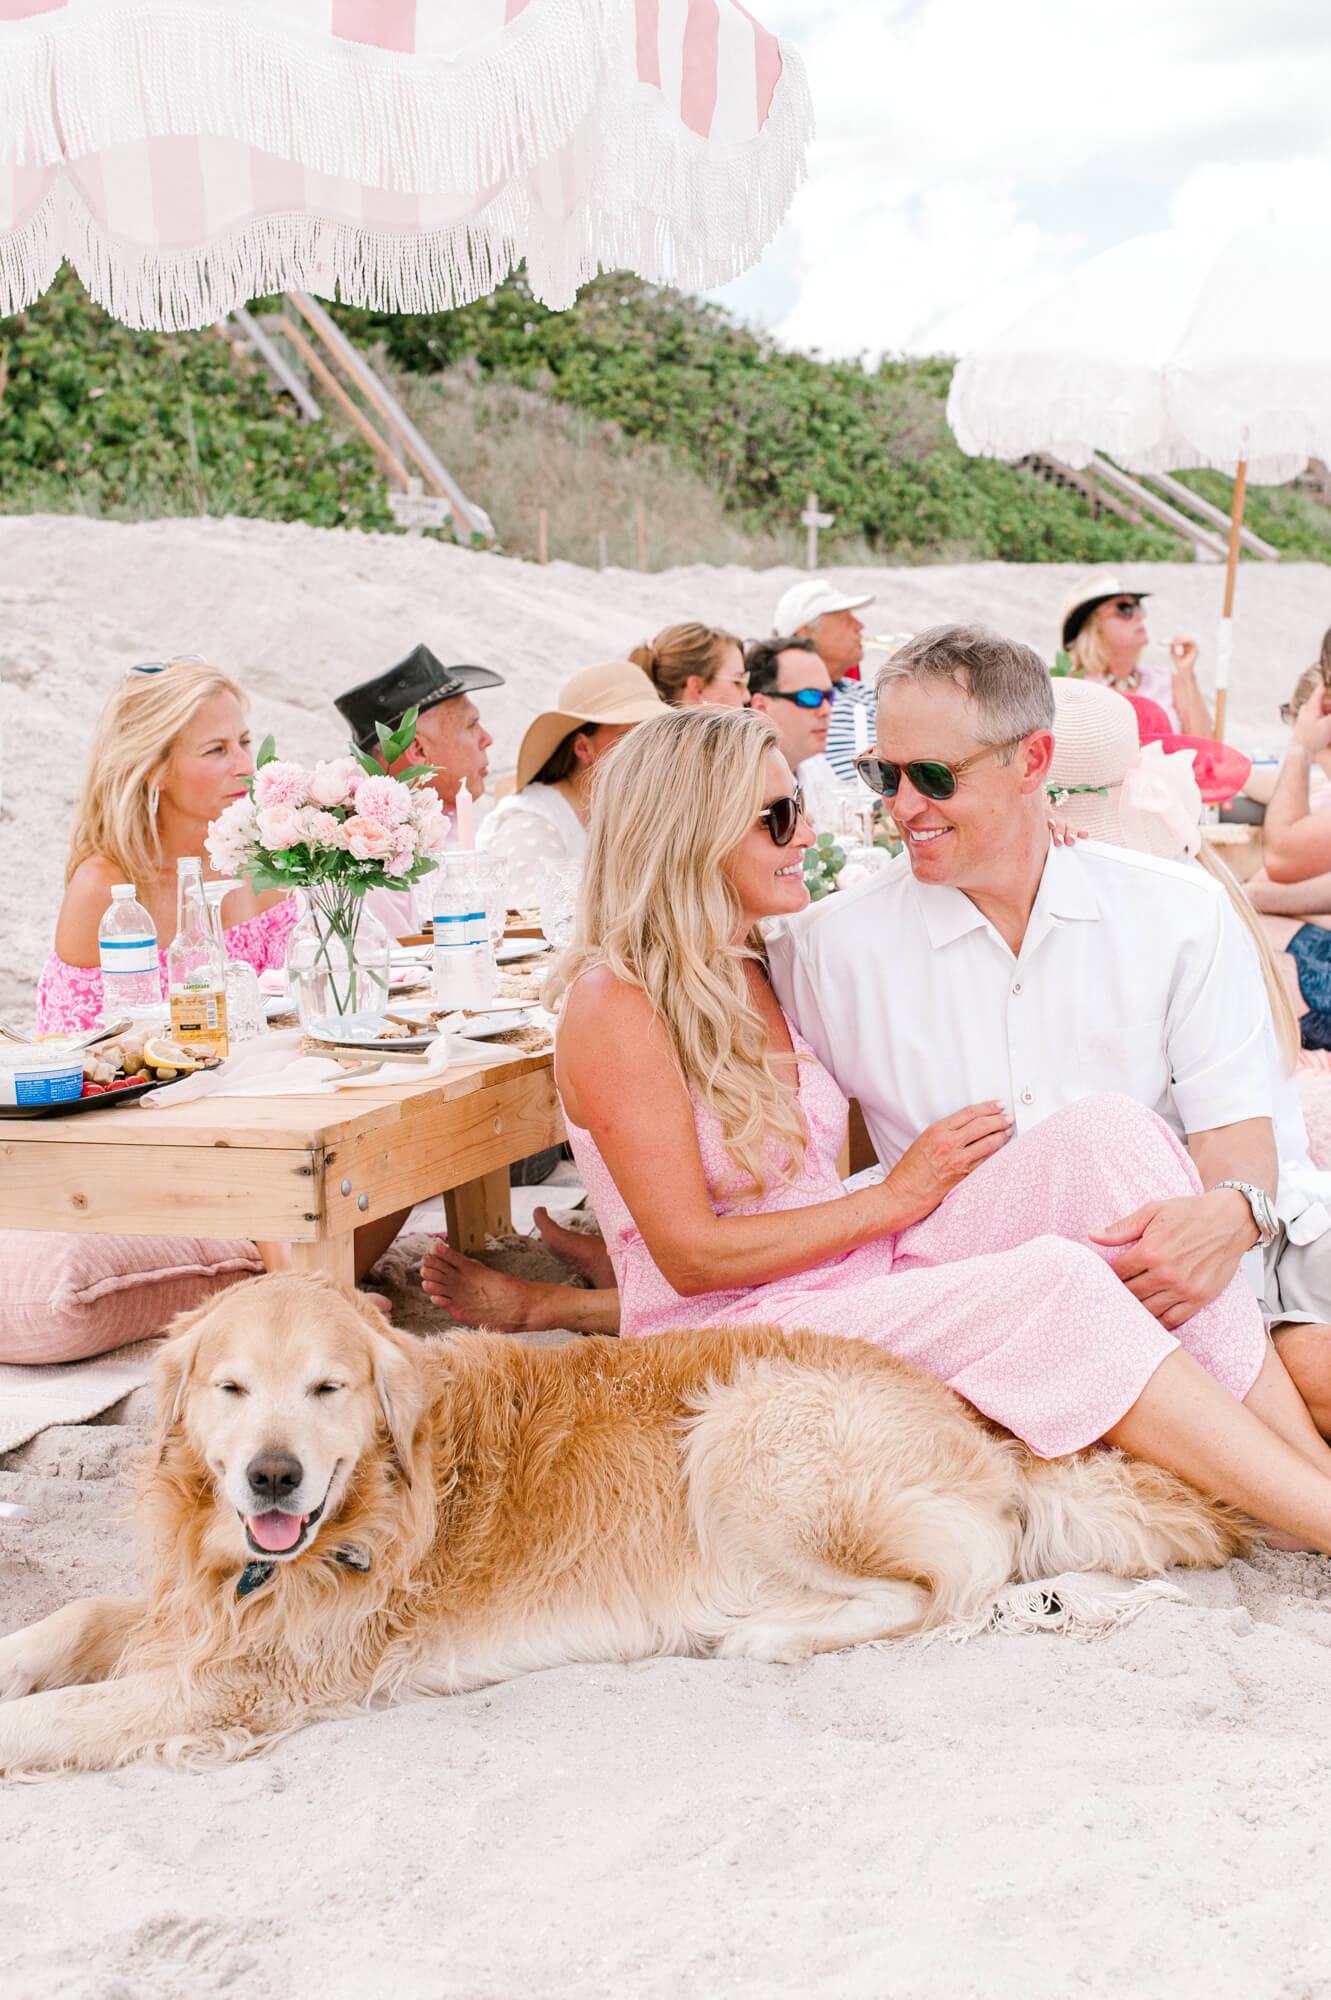 The cutest picnic on the beach to celebrate Janessa's 50th birthday - pups included. 